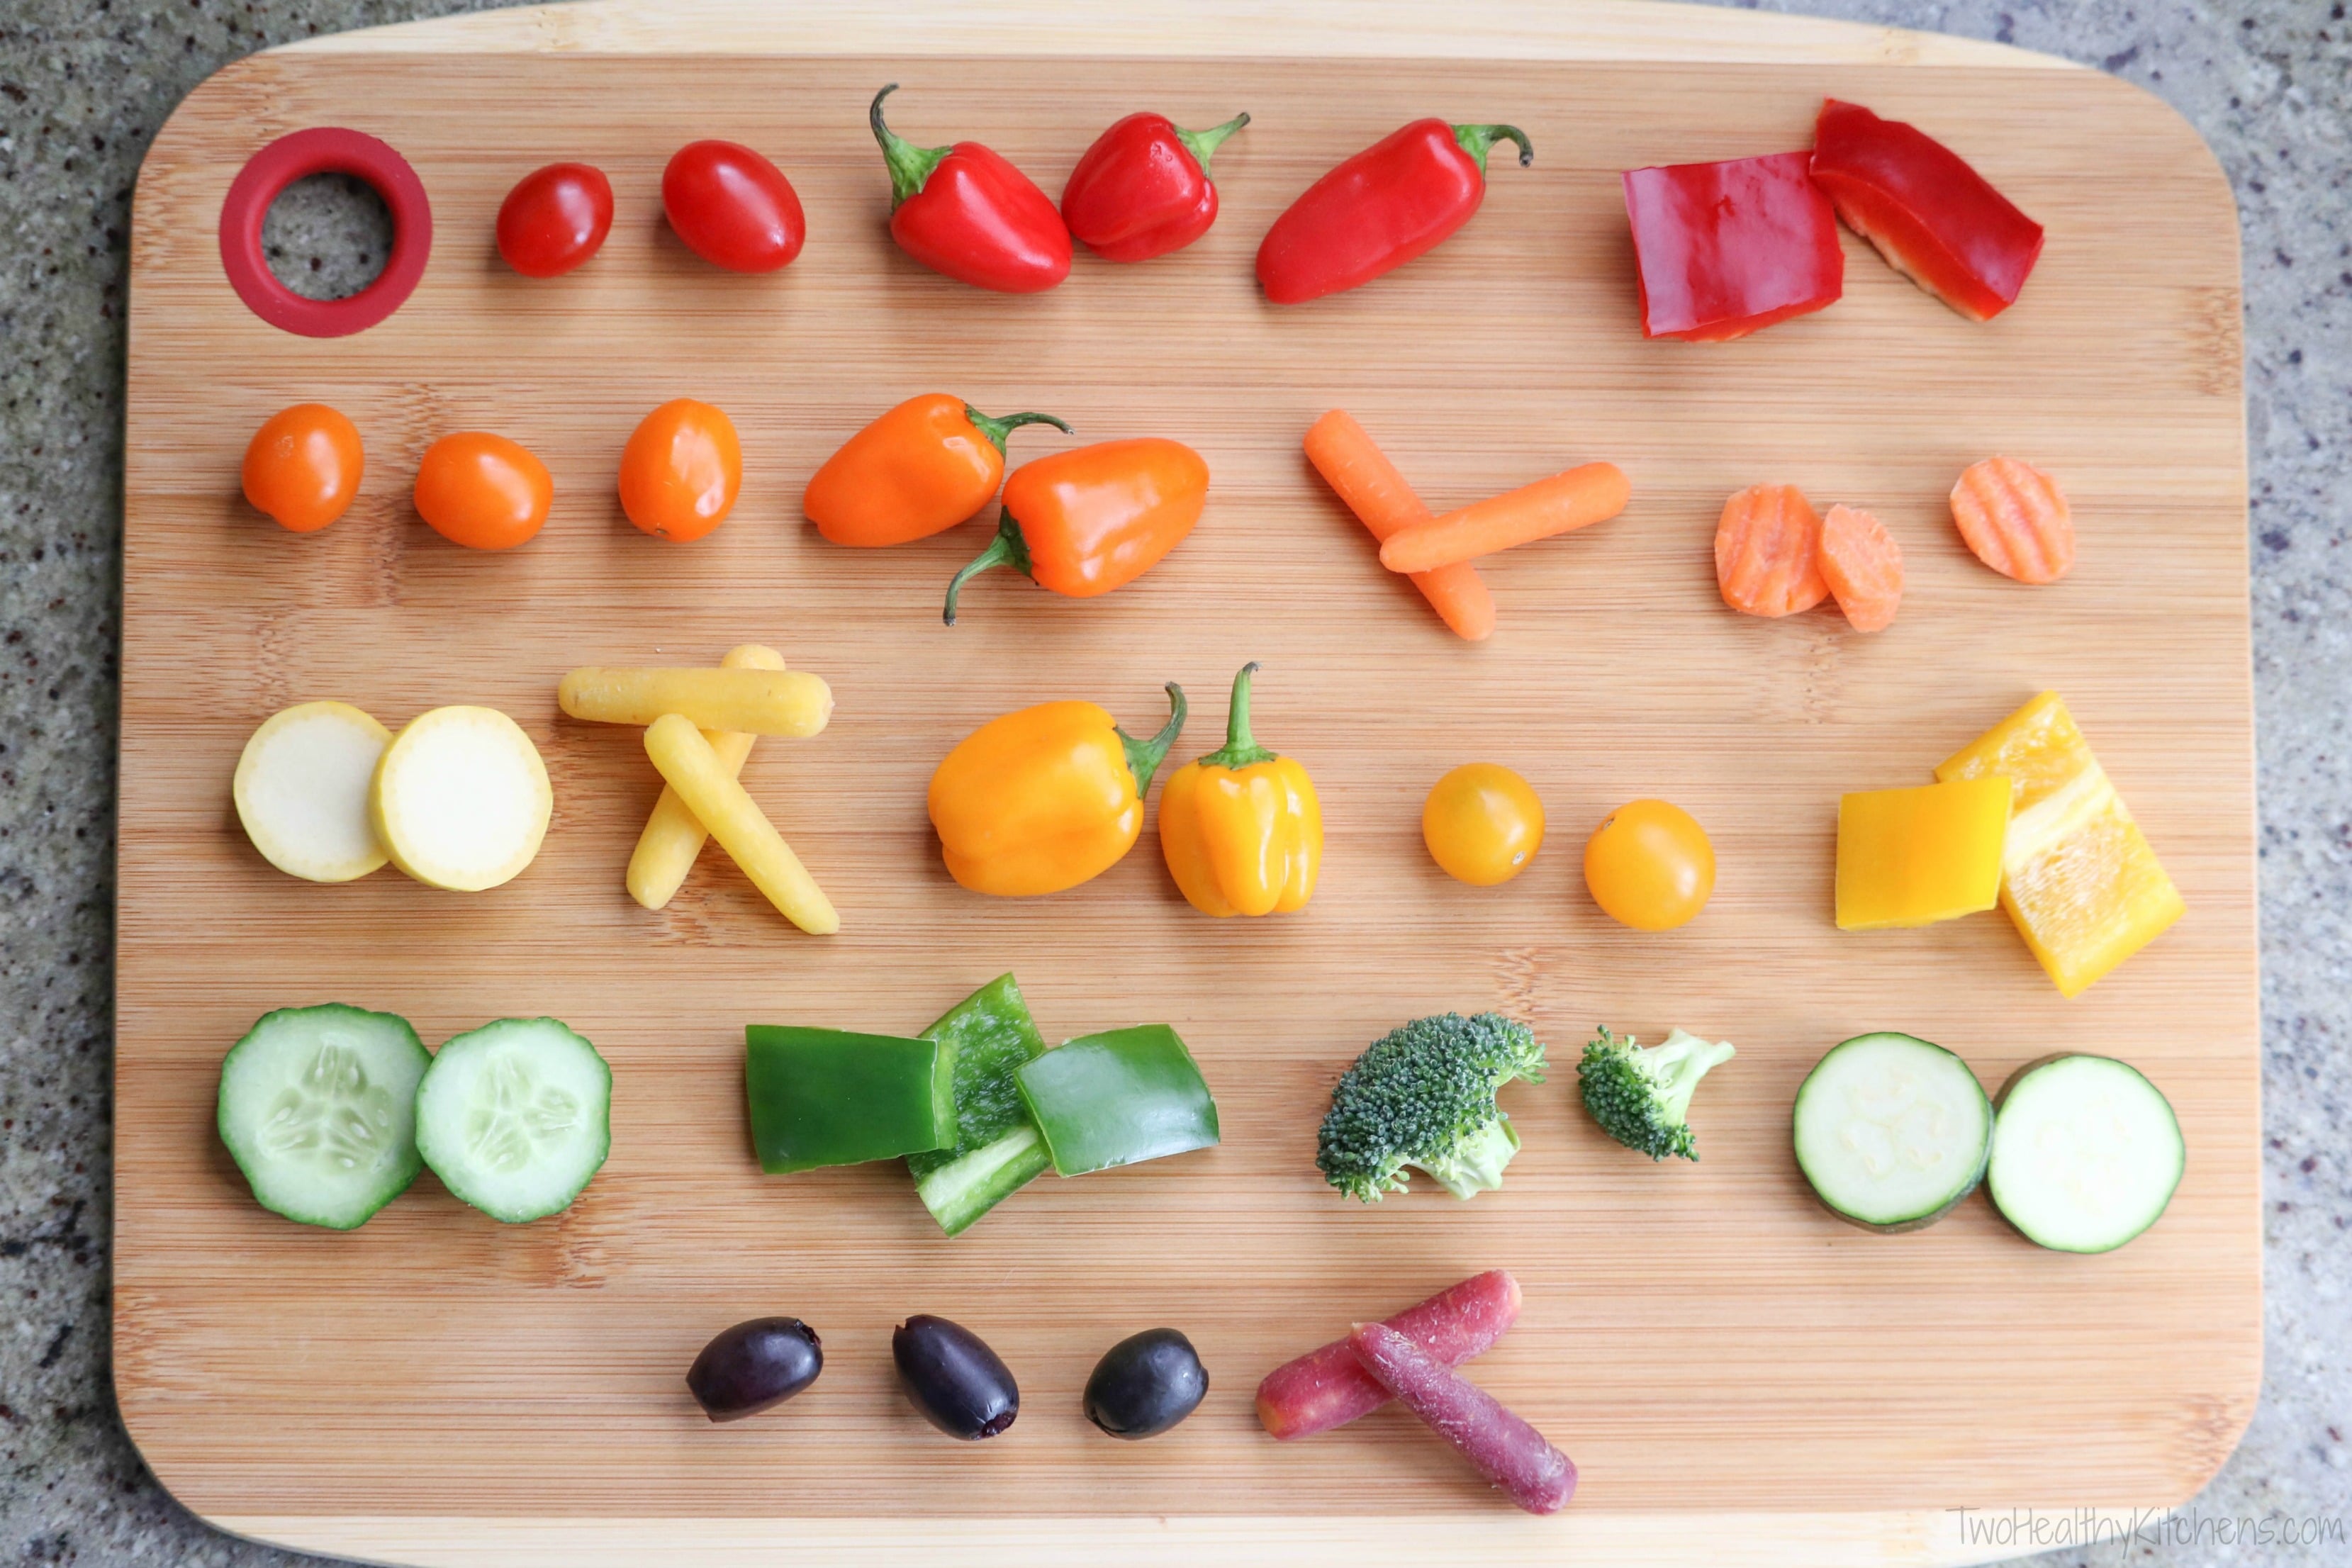 Overhead of cut vegetables lined up on cutting board, each row showing options in a certain color.